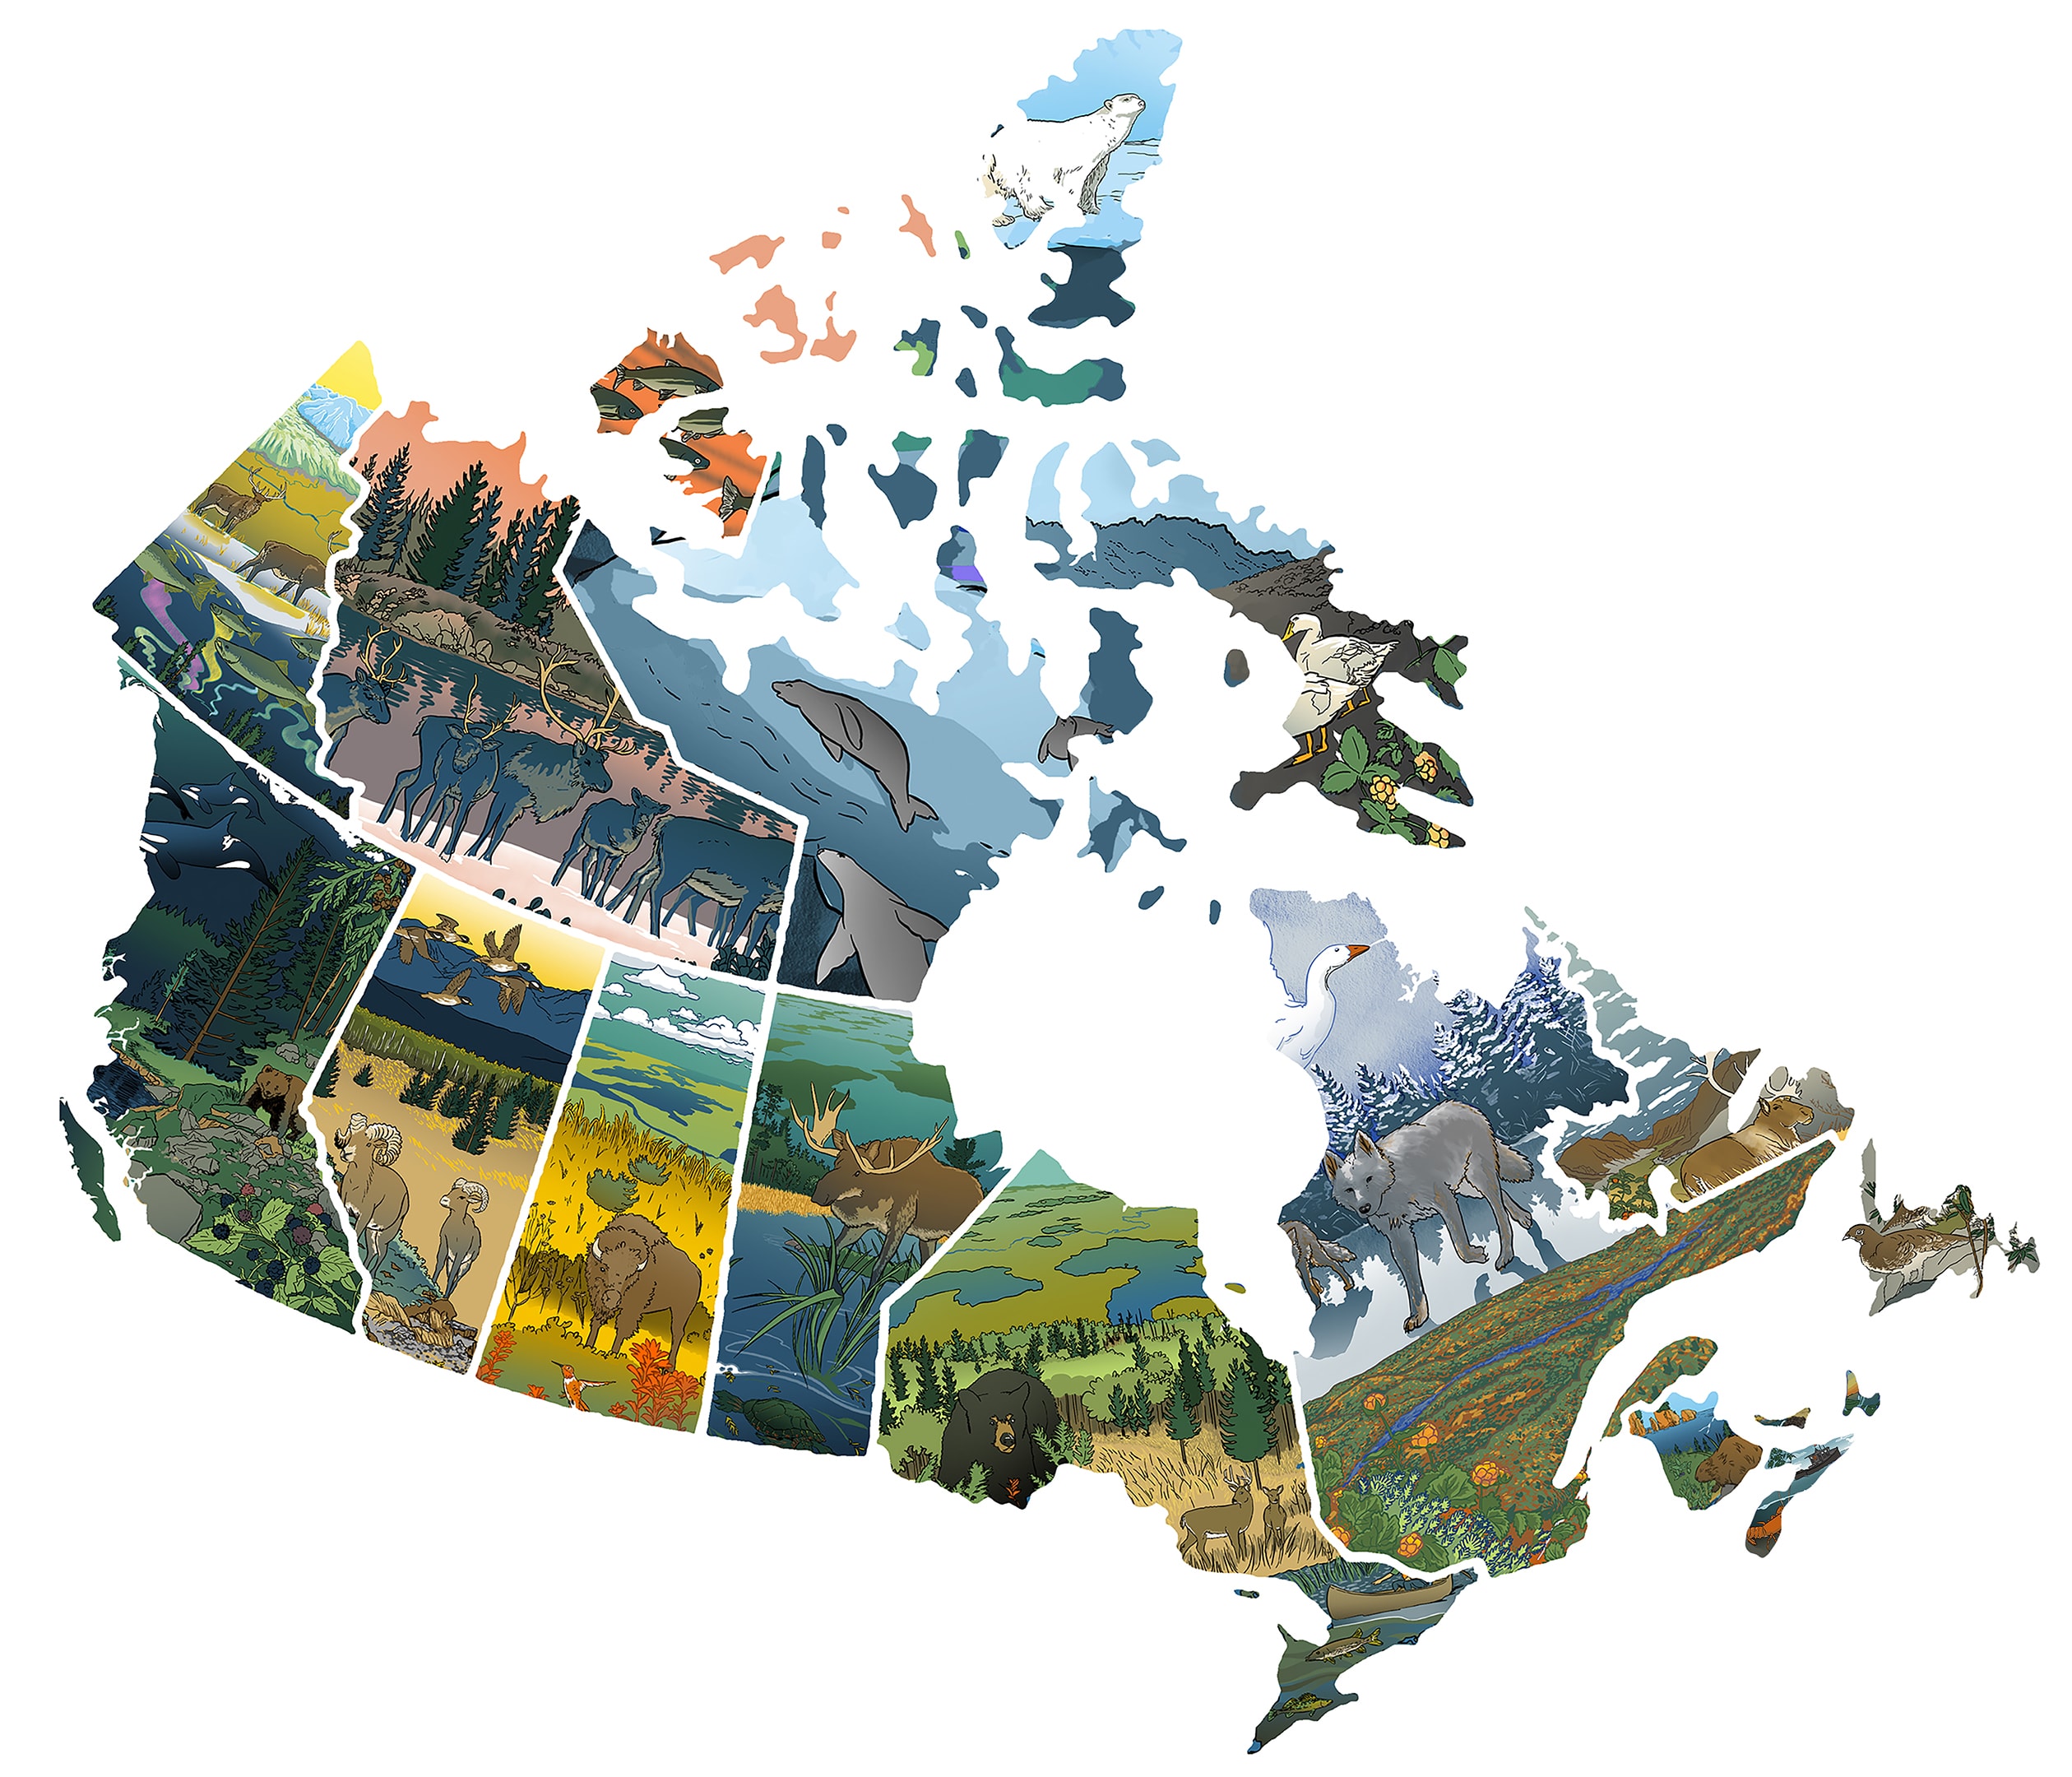 An illustrated map of Canada, including cultural keystone species such as bison, salmon, caribou, and deer.